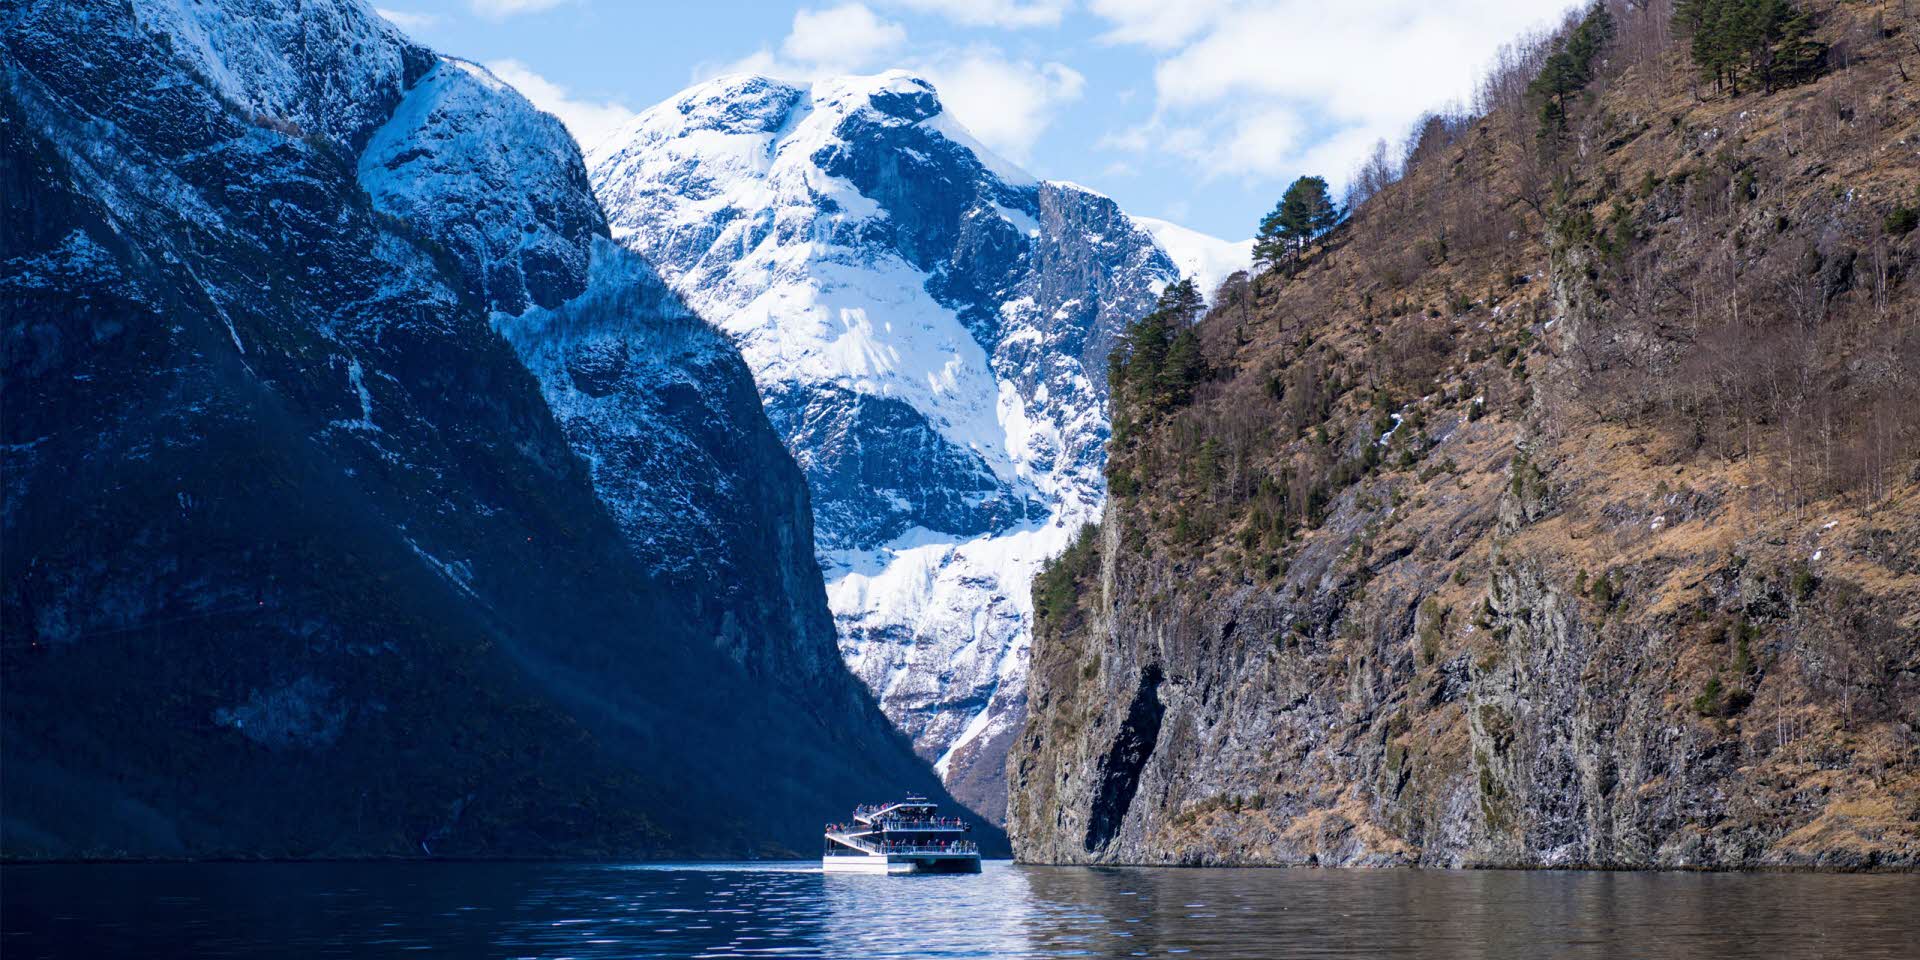 Future of The Fjords sailing on the Nærøyfjord in late winter with snow capped mountain behing and people standing on deck